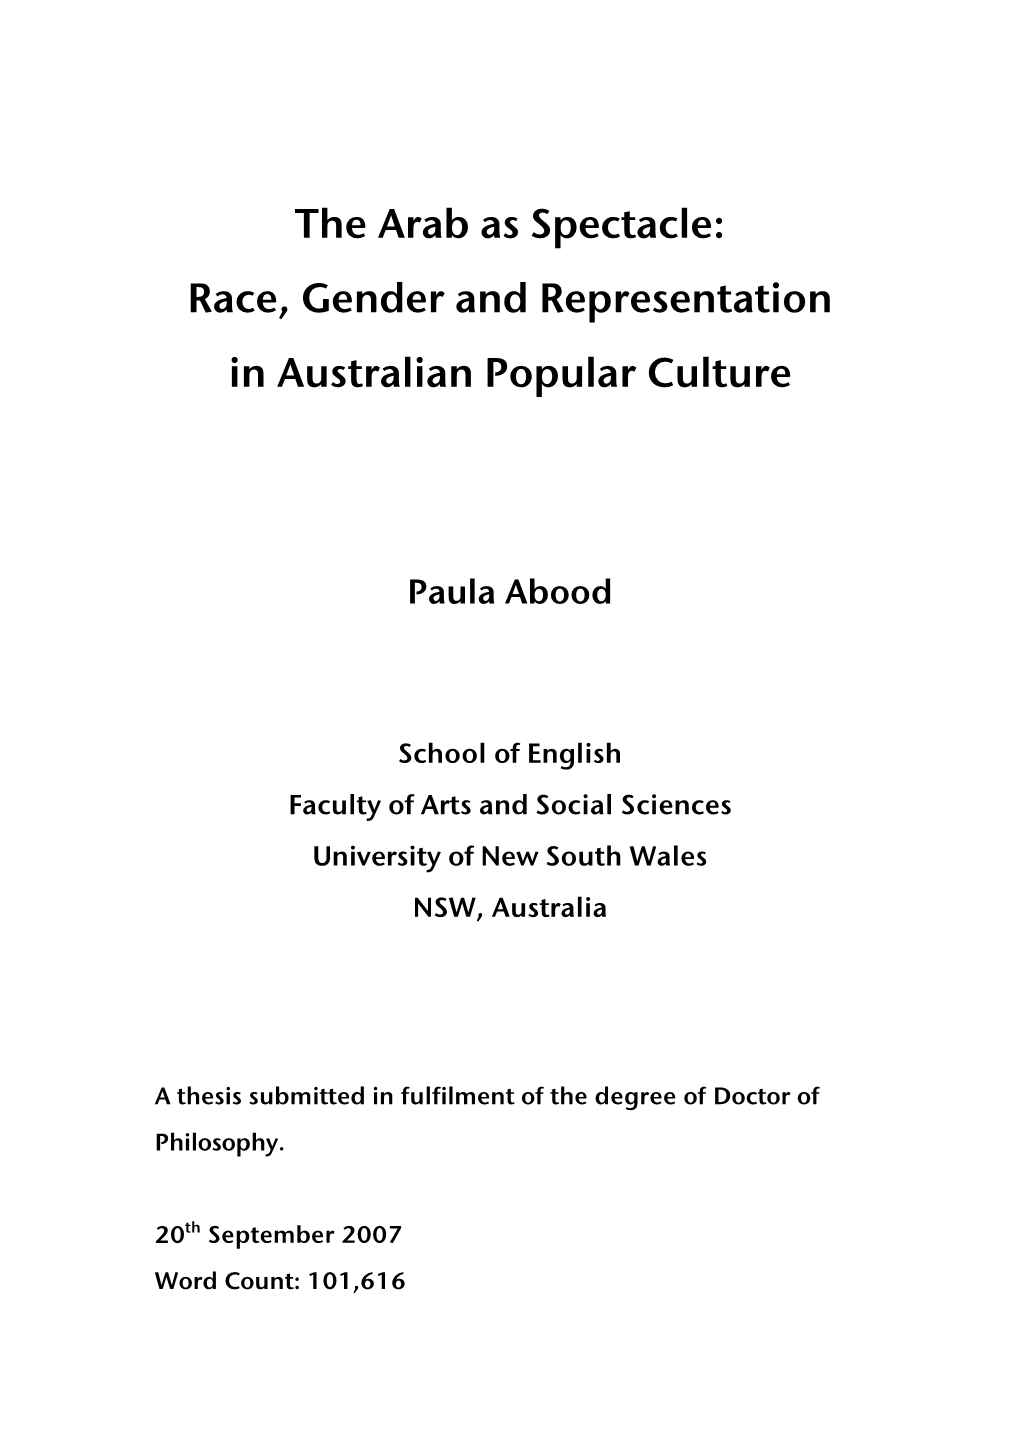 The Arab As Spectacle: Race, Gender and Representation in Australian Popular Culture